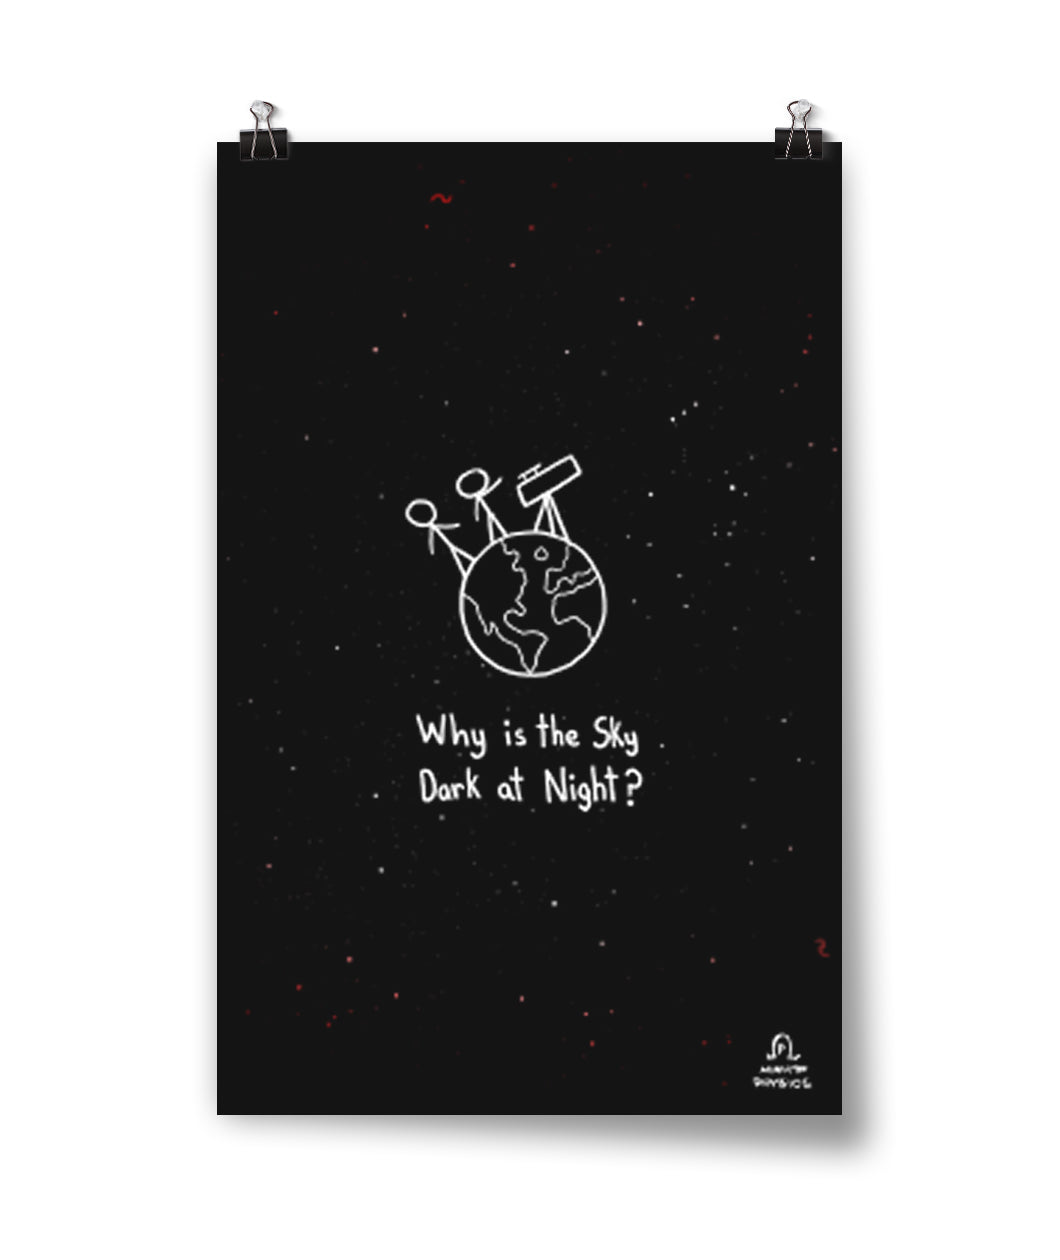 Black poster with shite and red dots and galaxies in the background. In the middle of the poster, two white stick figures stand on top of a white outline drawing of Earth looking through a white outline of a telescope. “Why is the Sky Dark at Night?” is below in white sans serif font - from Minute Physics